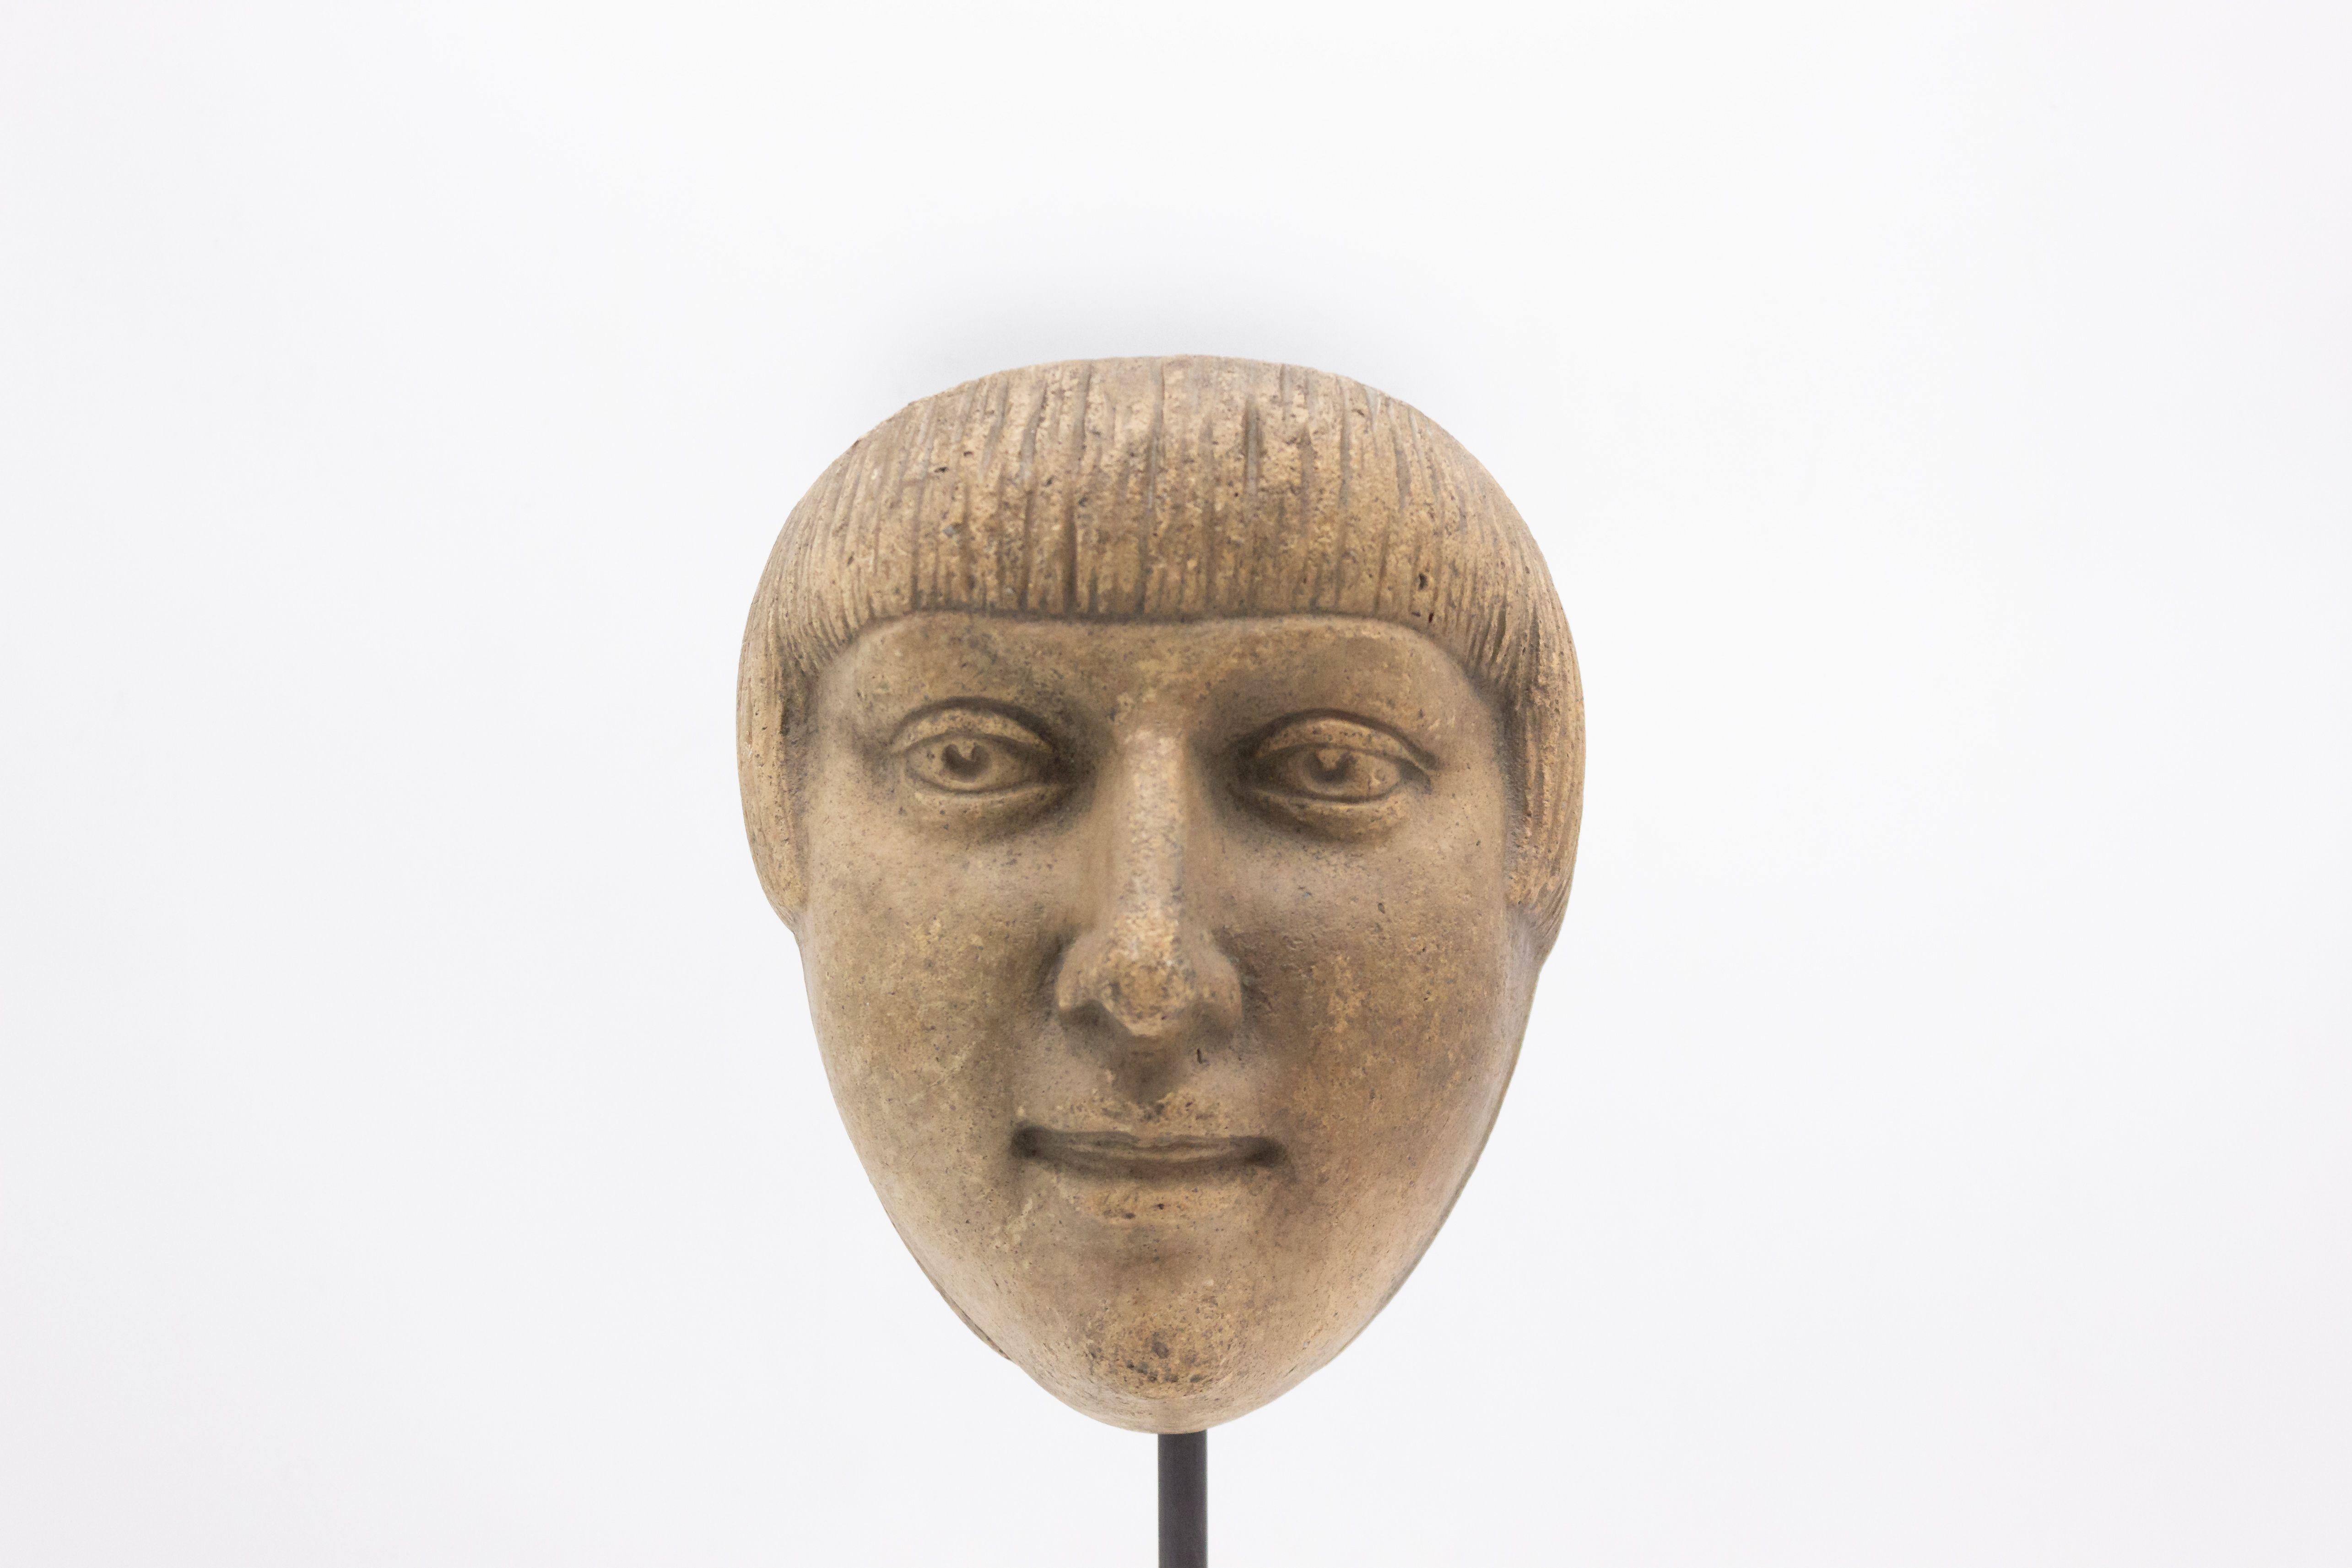 Continental German (late 19th Cent) sculpted terra-cotta master mask mold of a smiling male face with a 